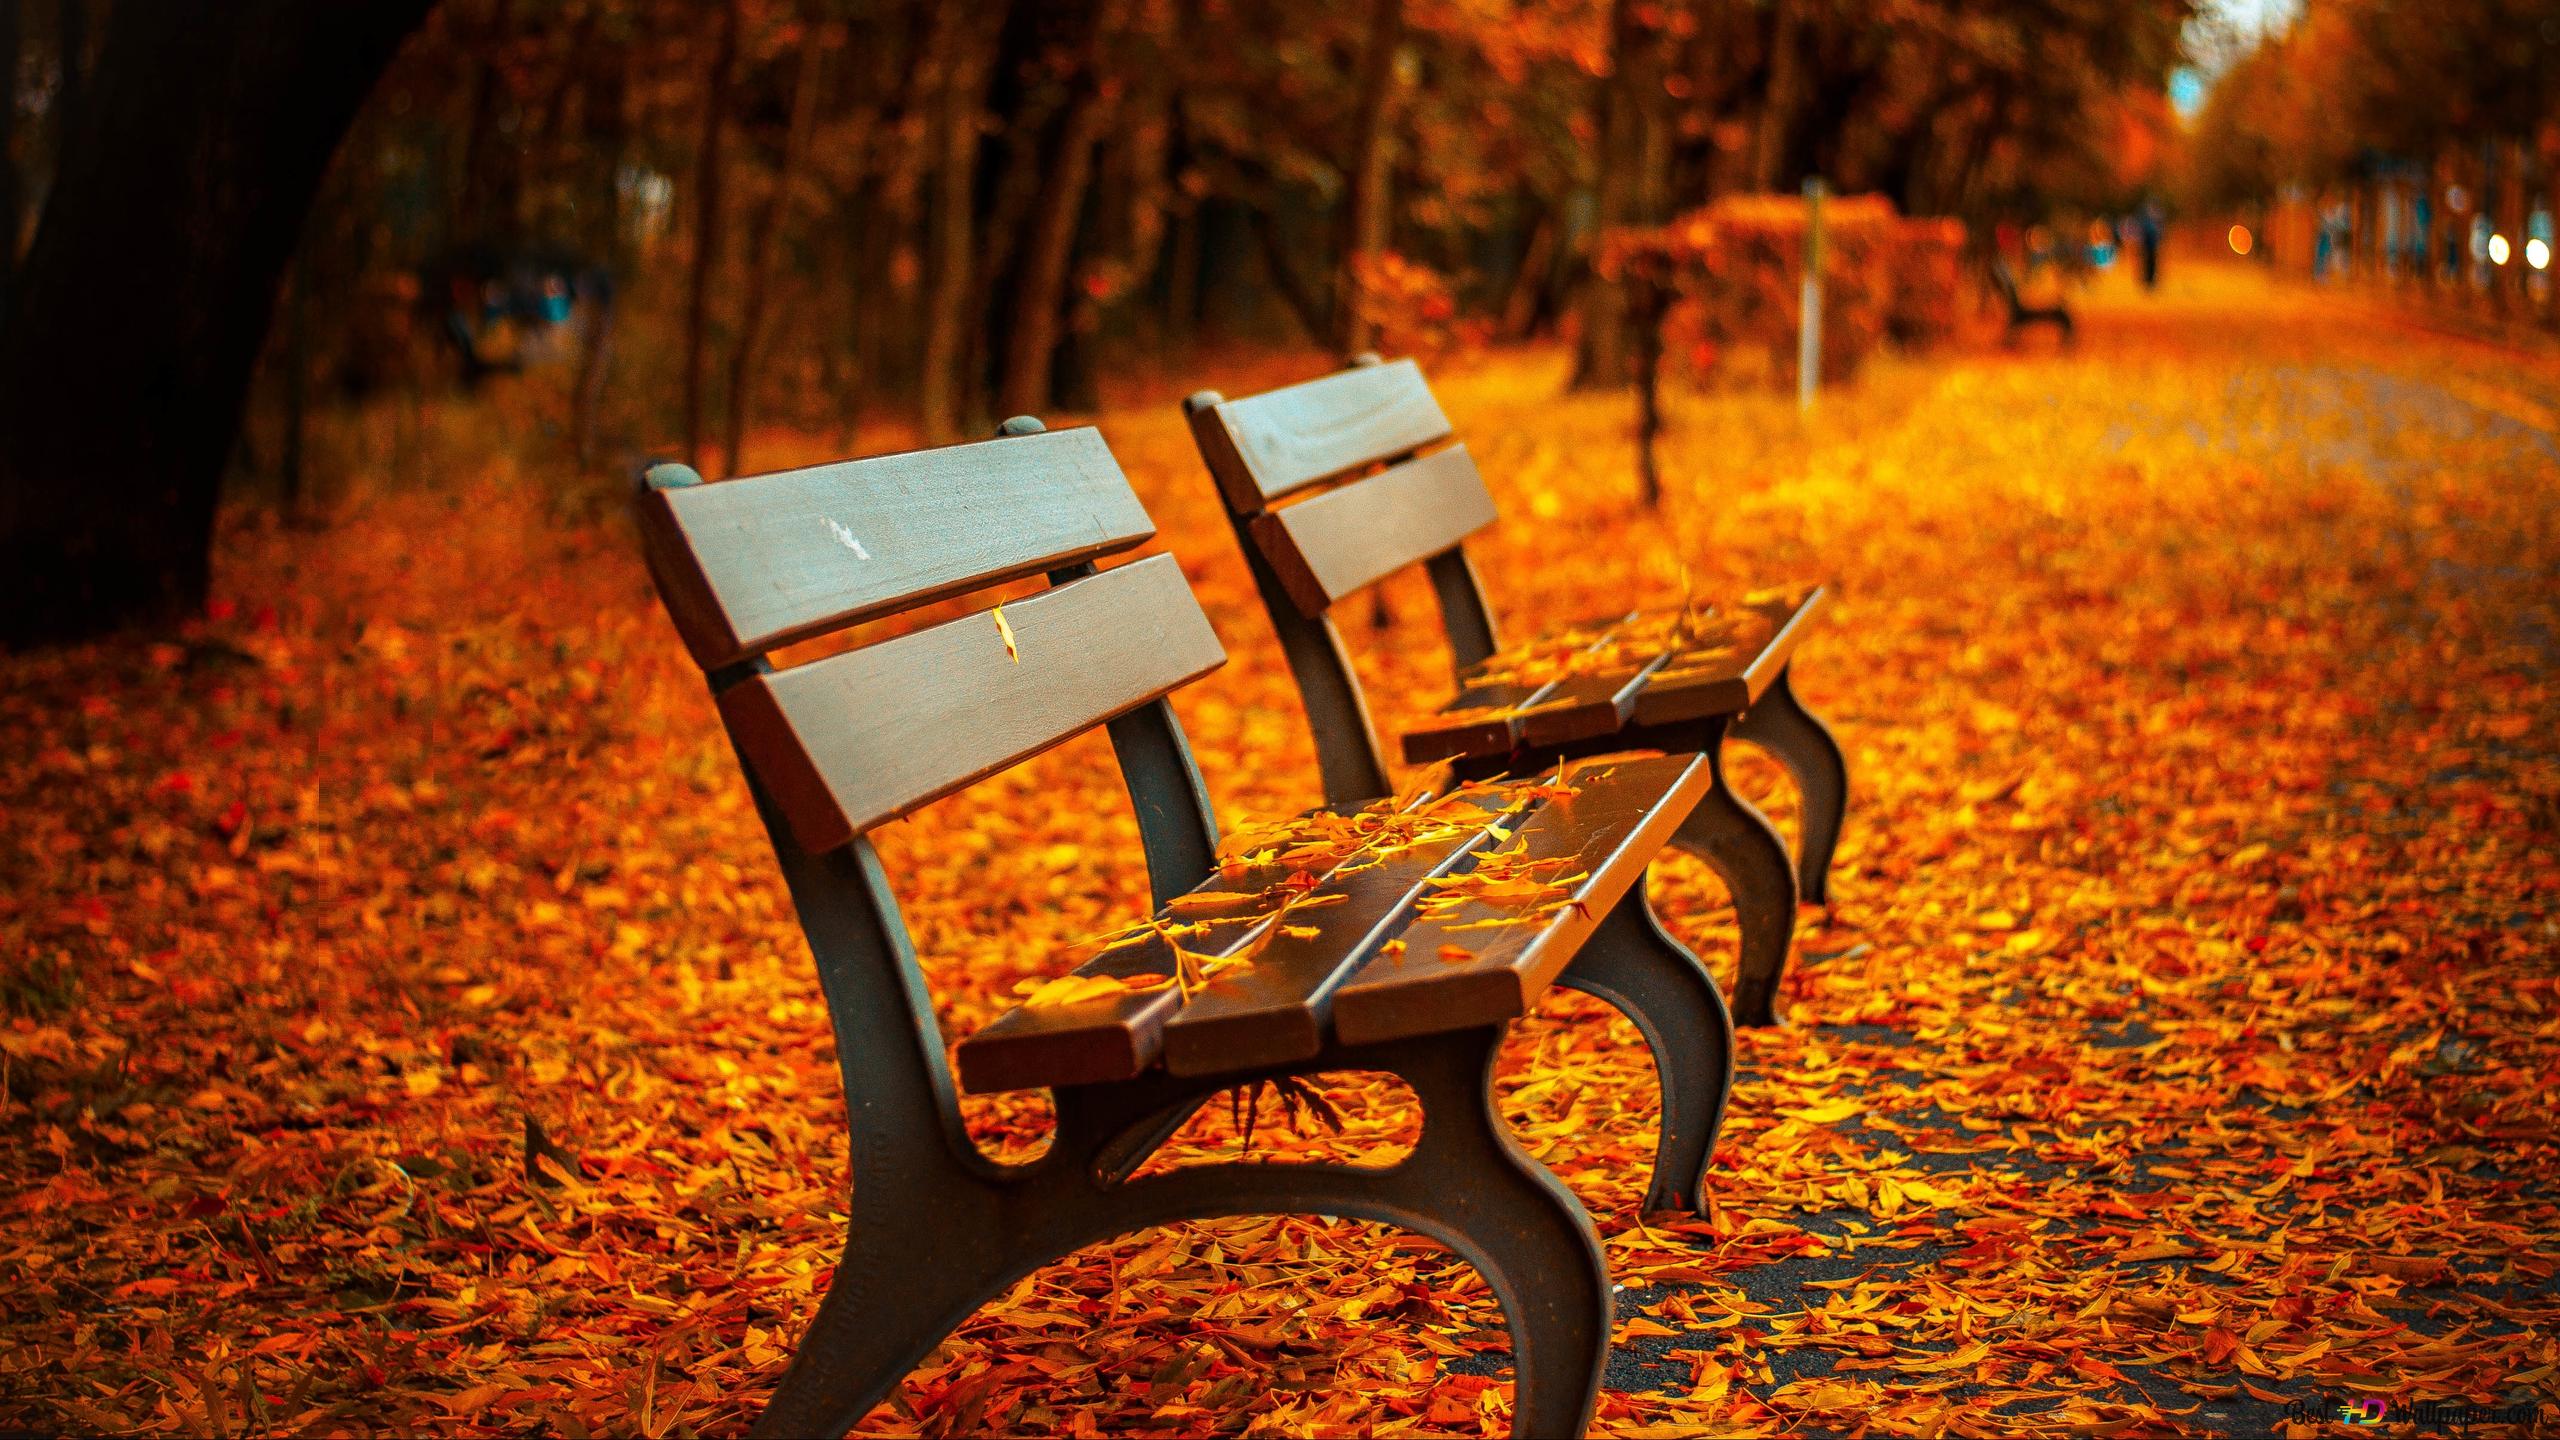 fallen and yellowed leaves in autumn 4K wallpaper download